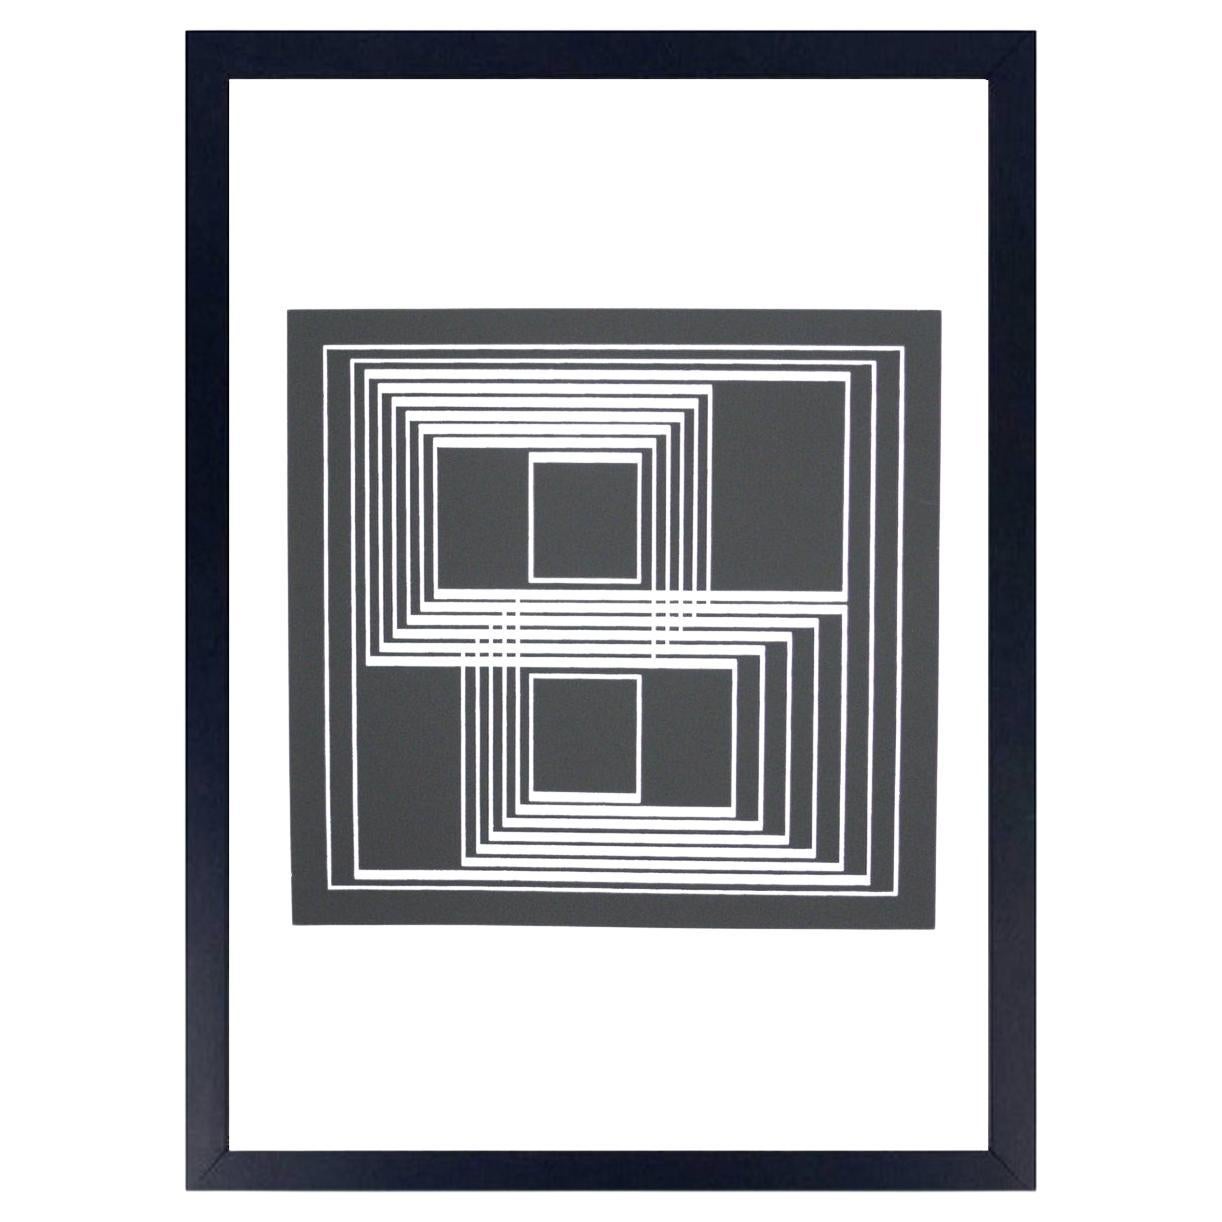 Josef Albers Signed Abstract Screenprint "Seclusion" For Sale